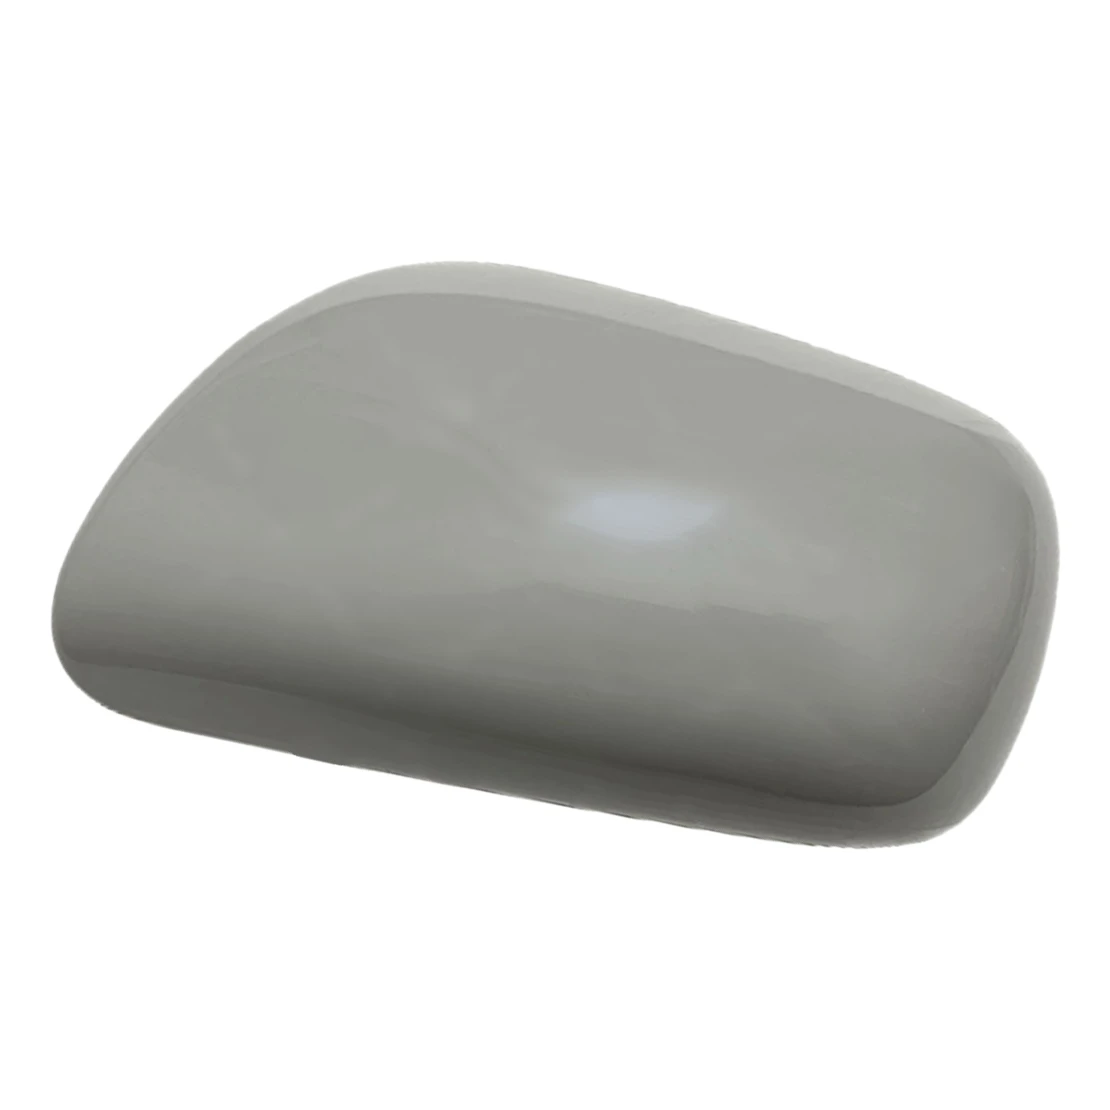 2007-2012 For Toyota Corolla CE BASE XLE Gray Passenger Side Mirror Cap Cover s 